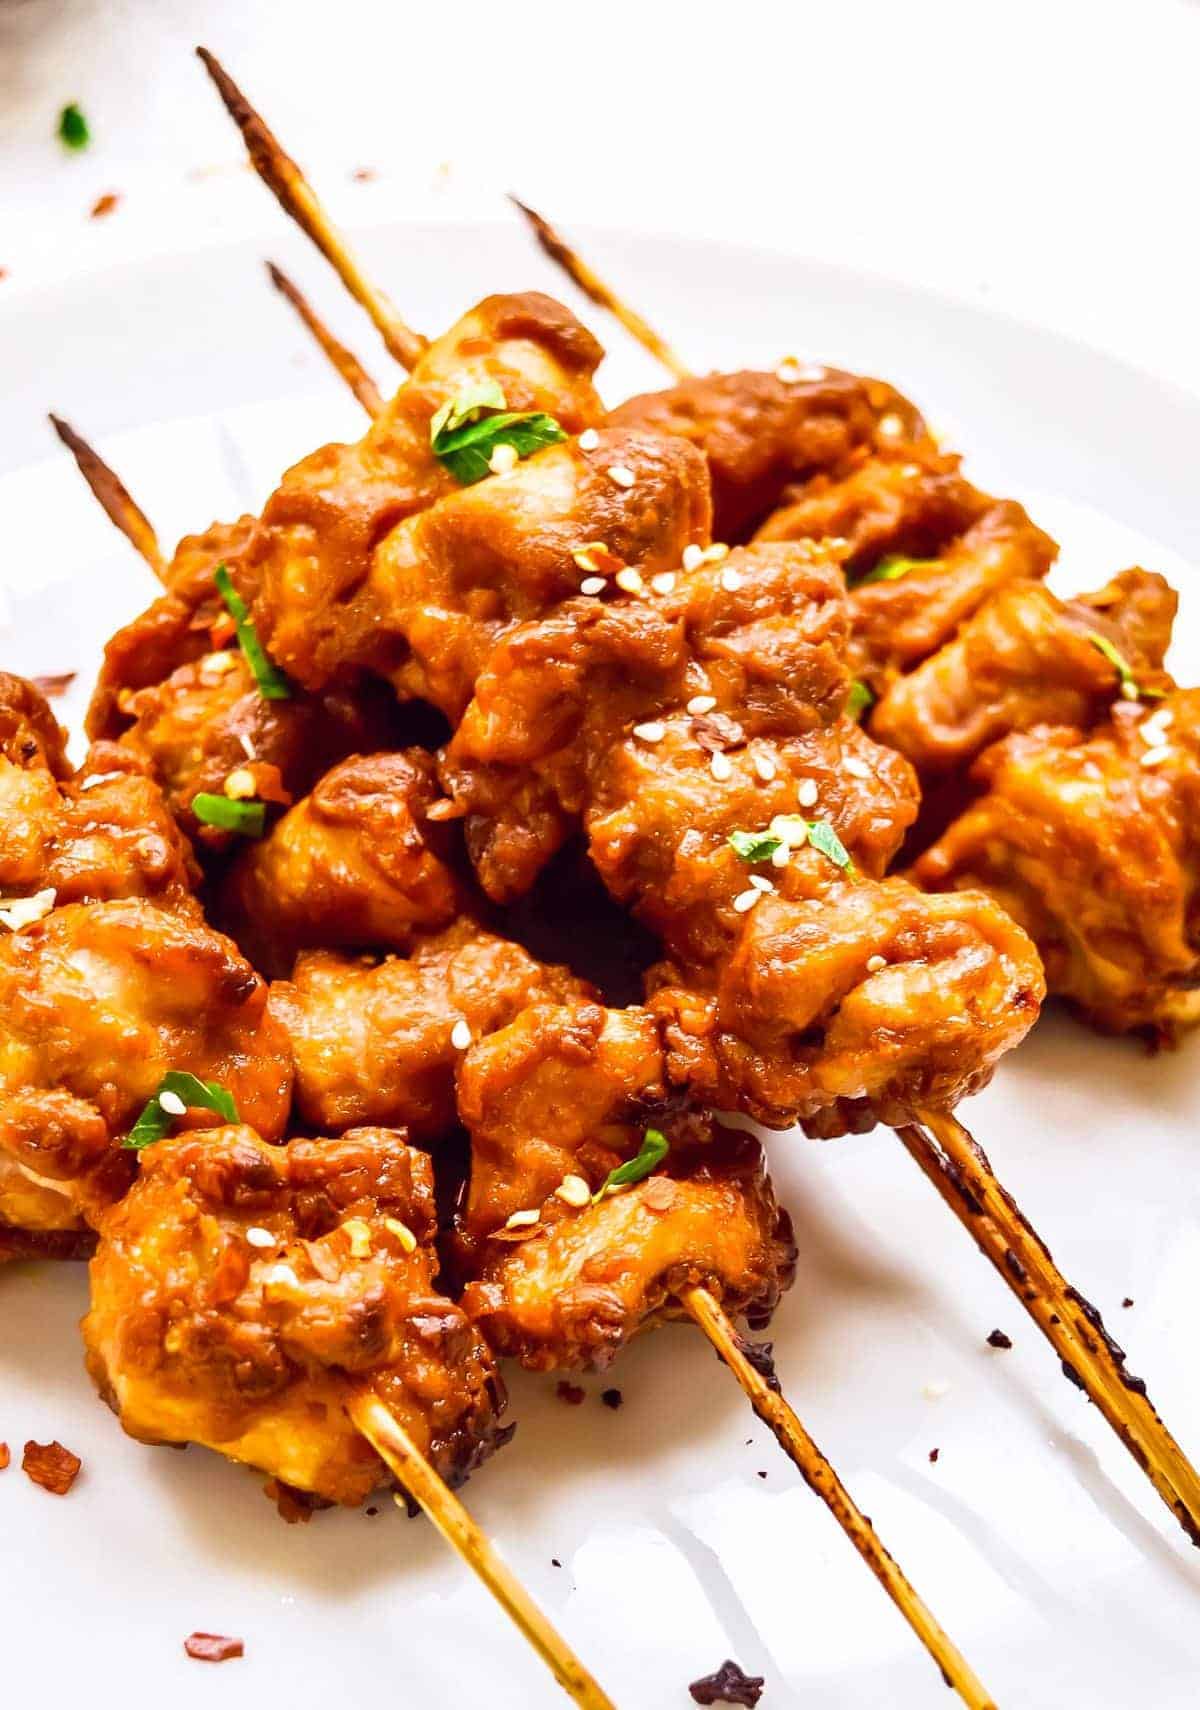 Chicken Satay Skewers With Easy Peanut Sauce Recipe Video,What Is Garam Masala Made Of